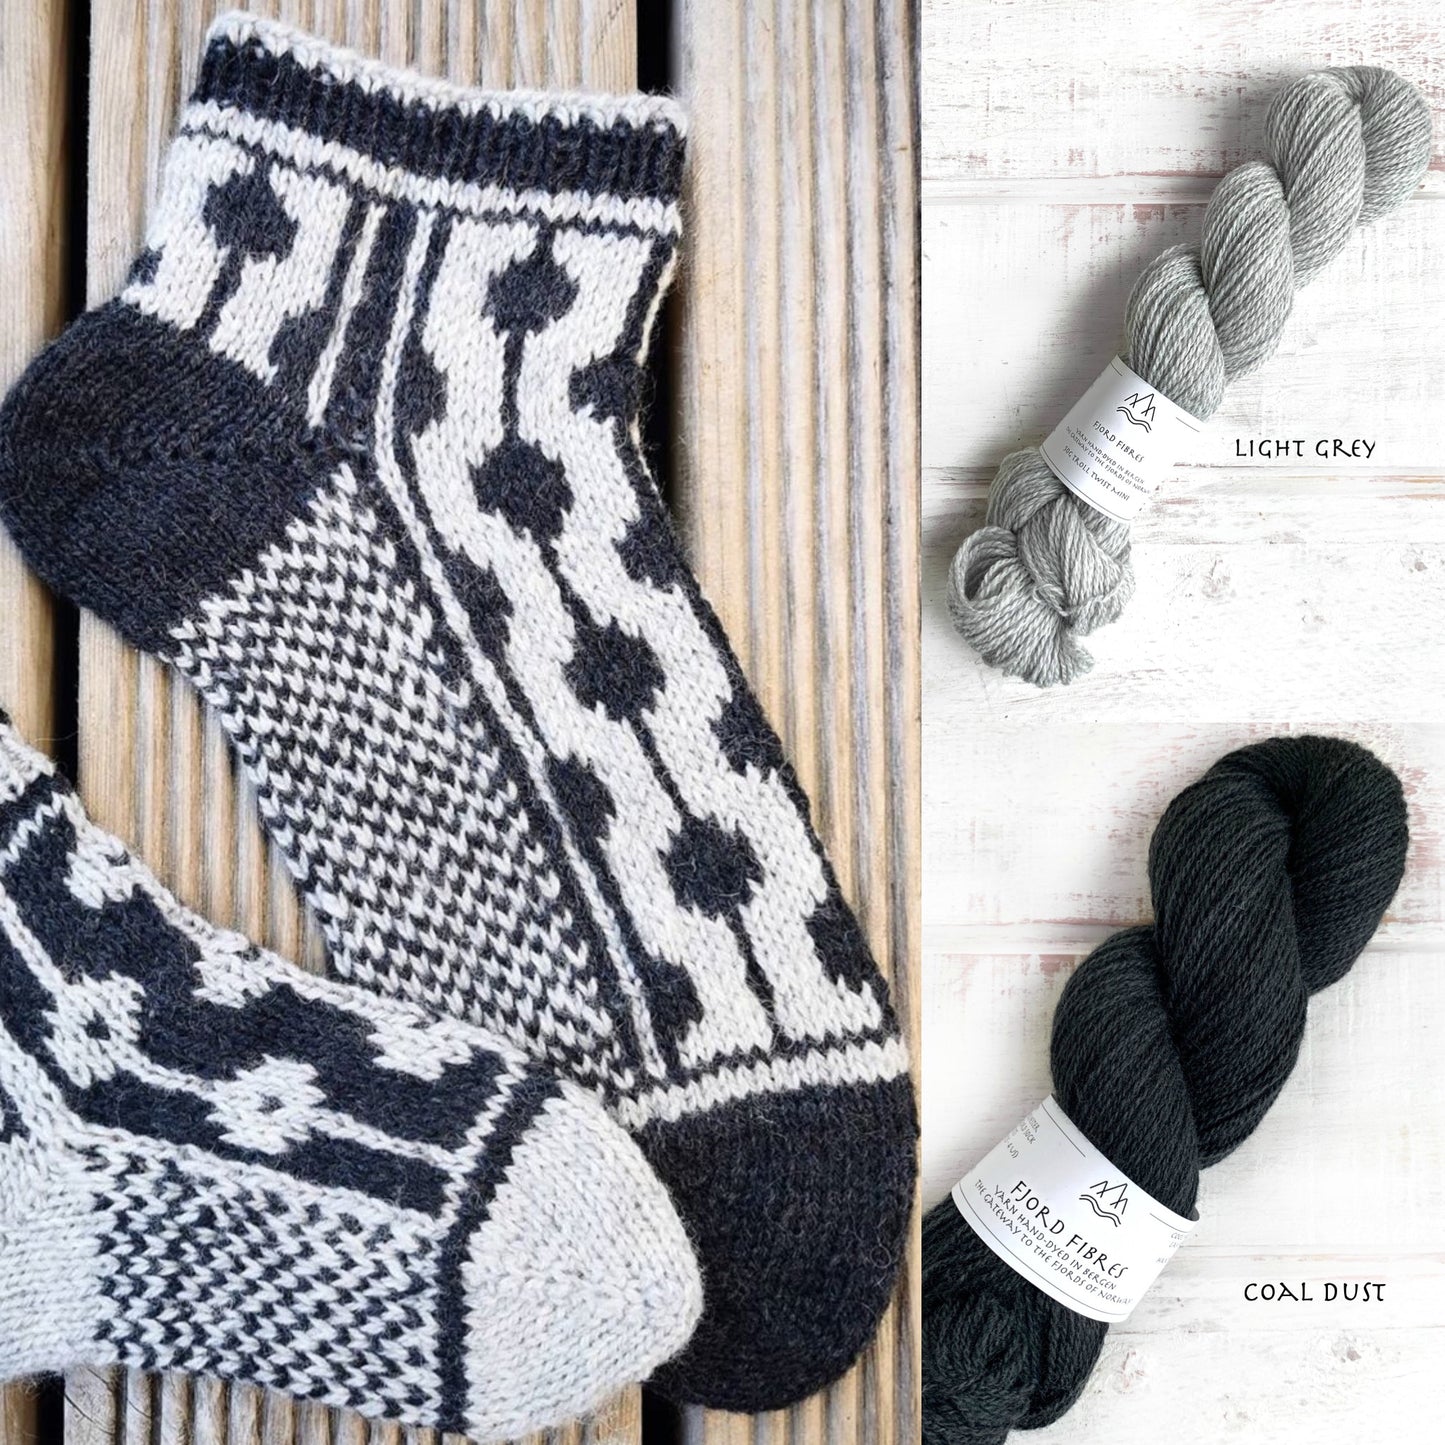 Dotted Line Socks Kit - Light Grey/Coal Dust - Yarn and Printed Pattern in English/Norwegian